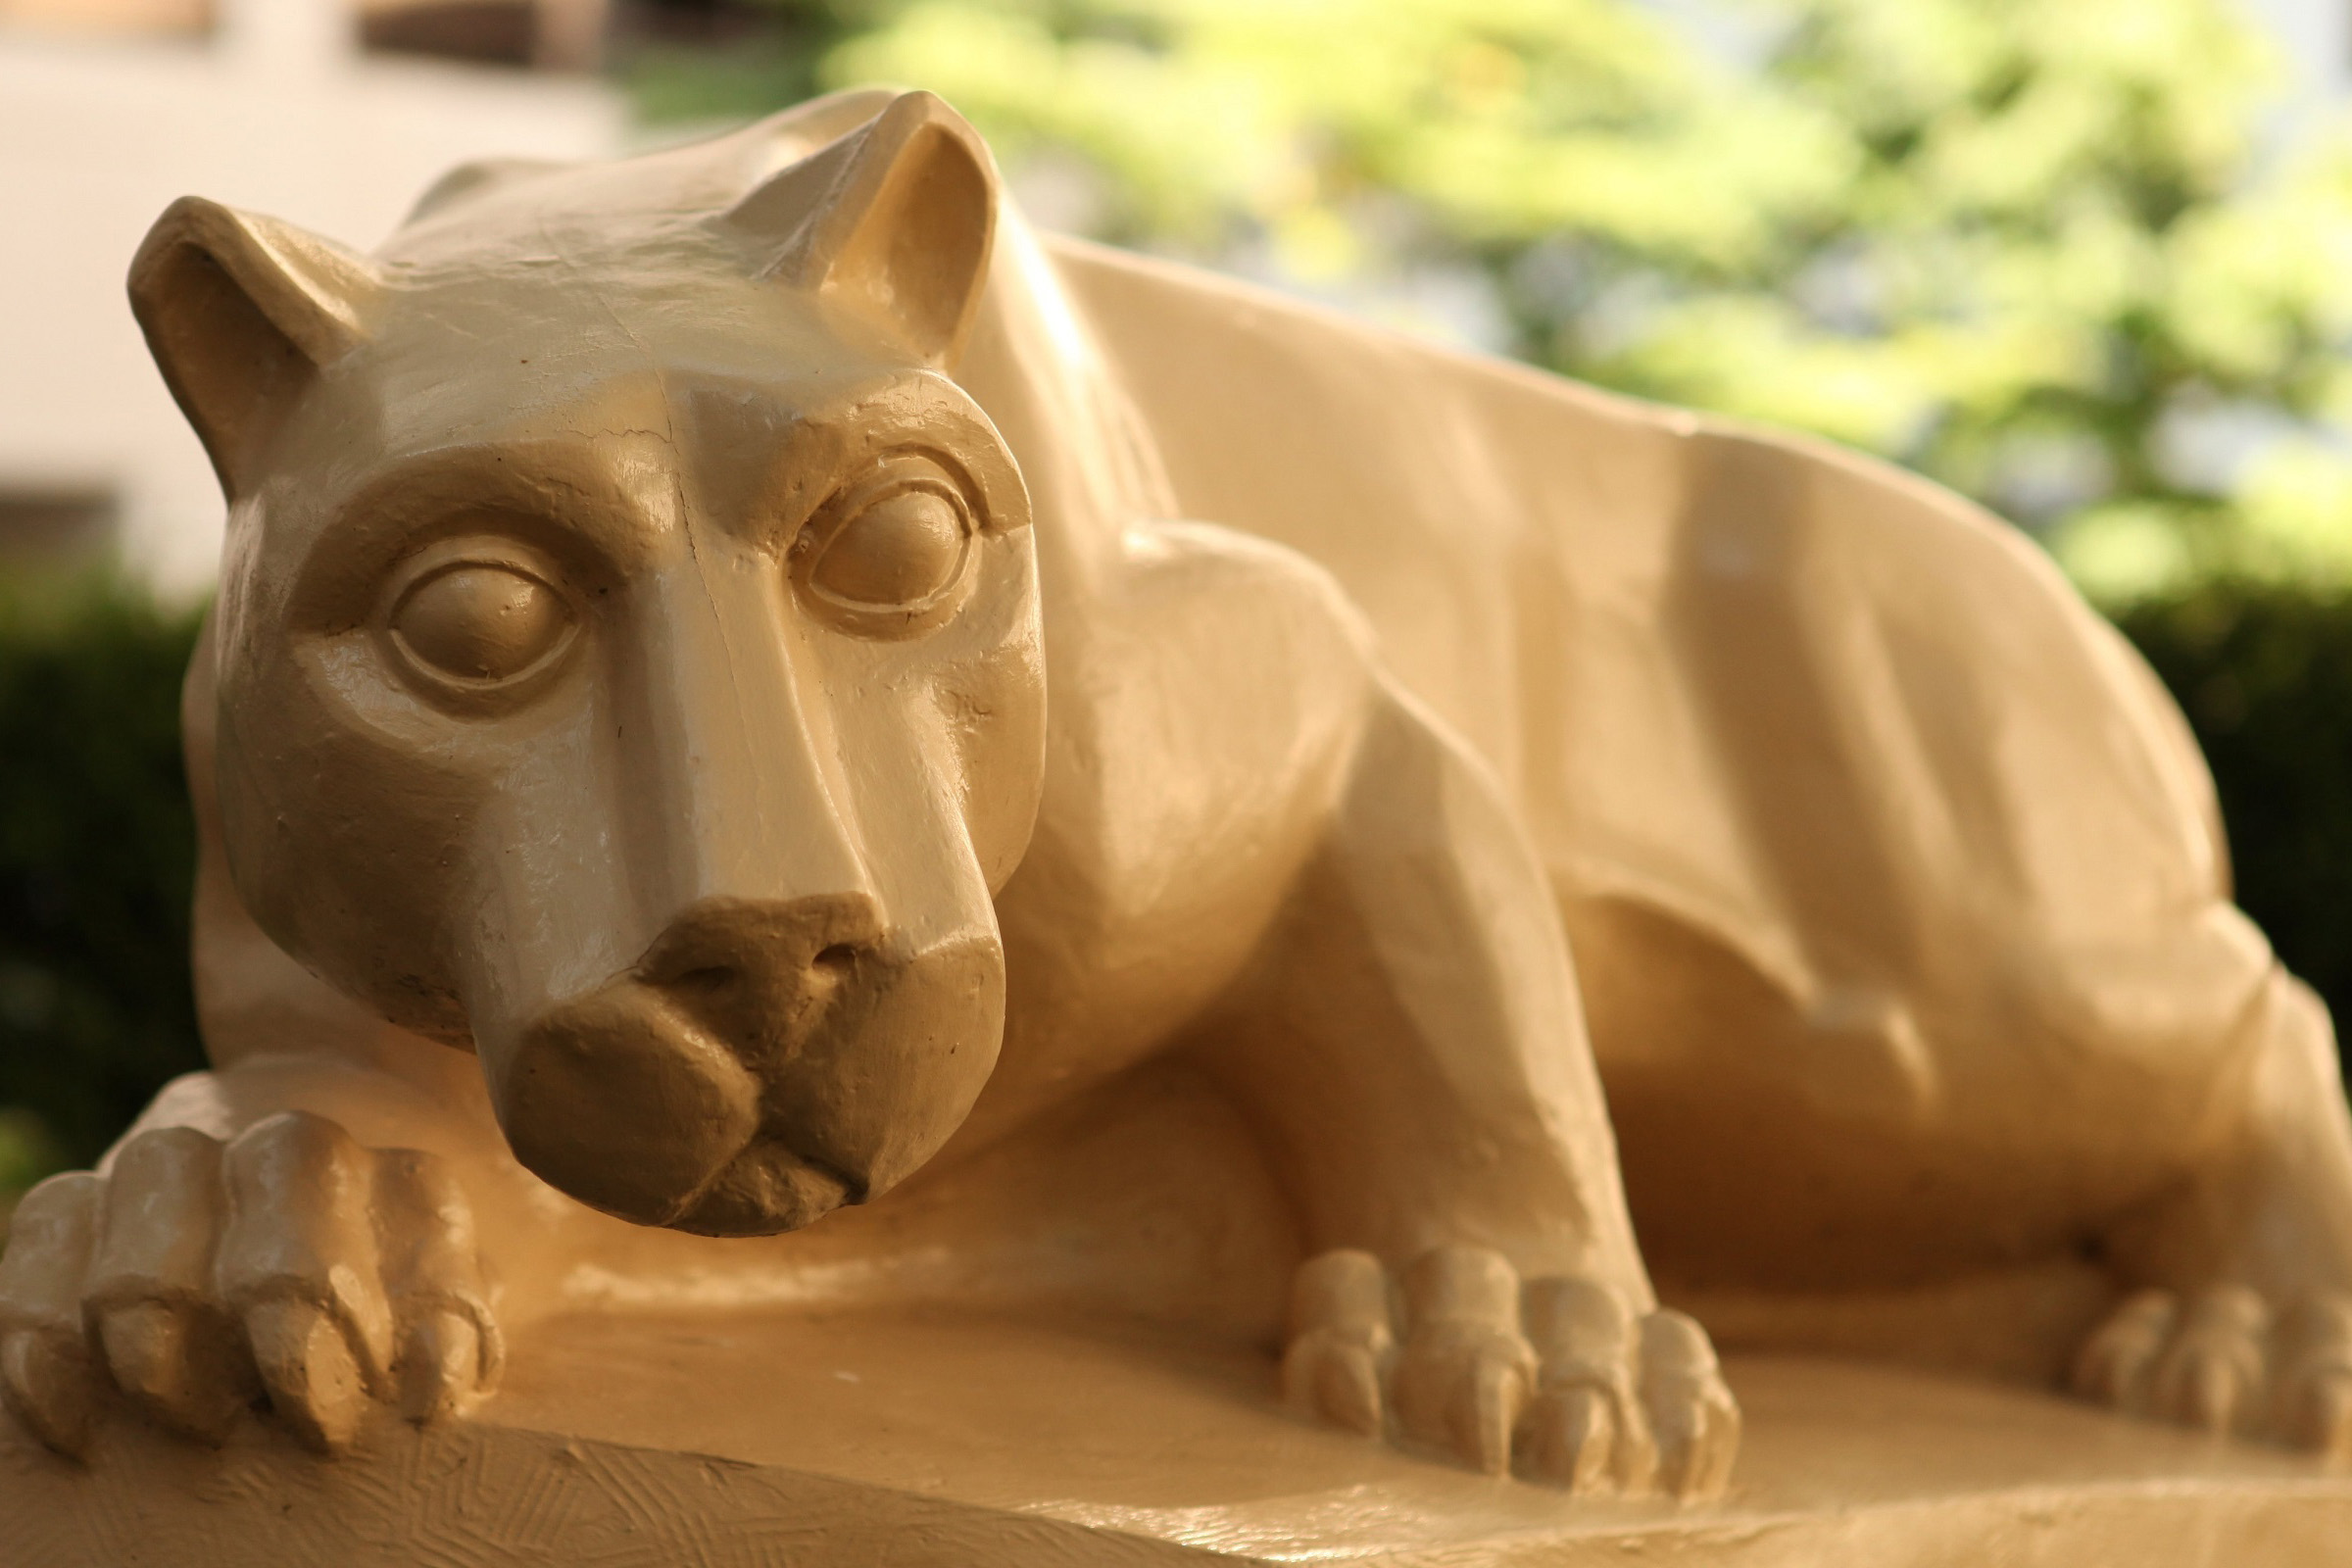 Nittany Lion statue close-up